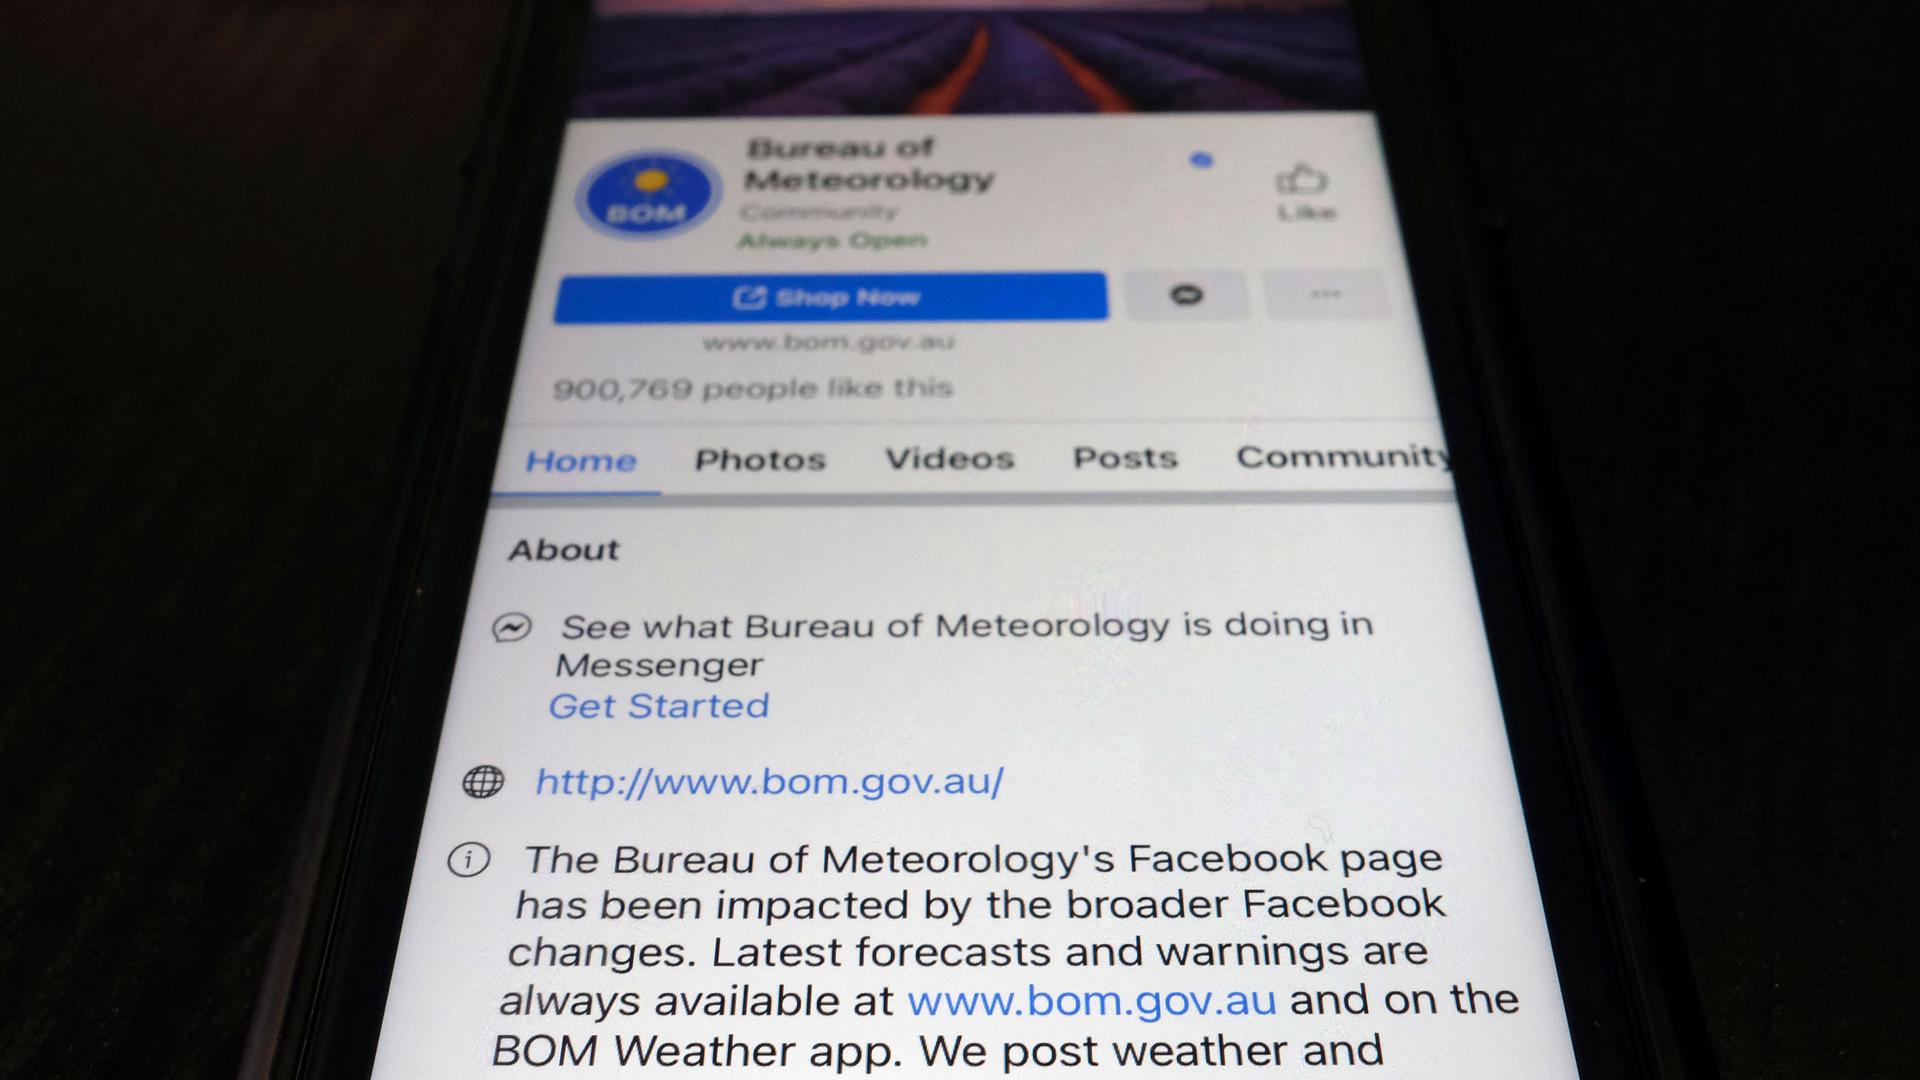 A close up photograph of a mobile phone showing the Bureau of Meteorology's page on the Facebook app.